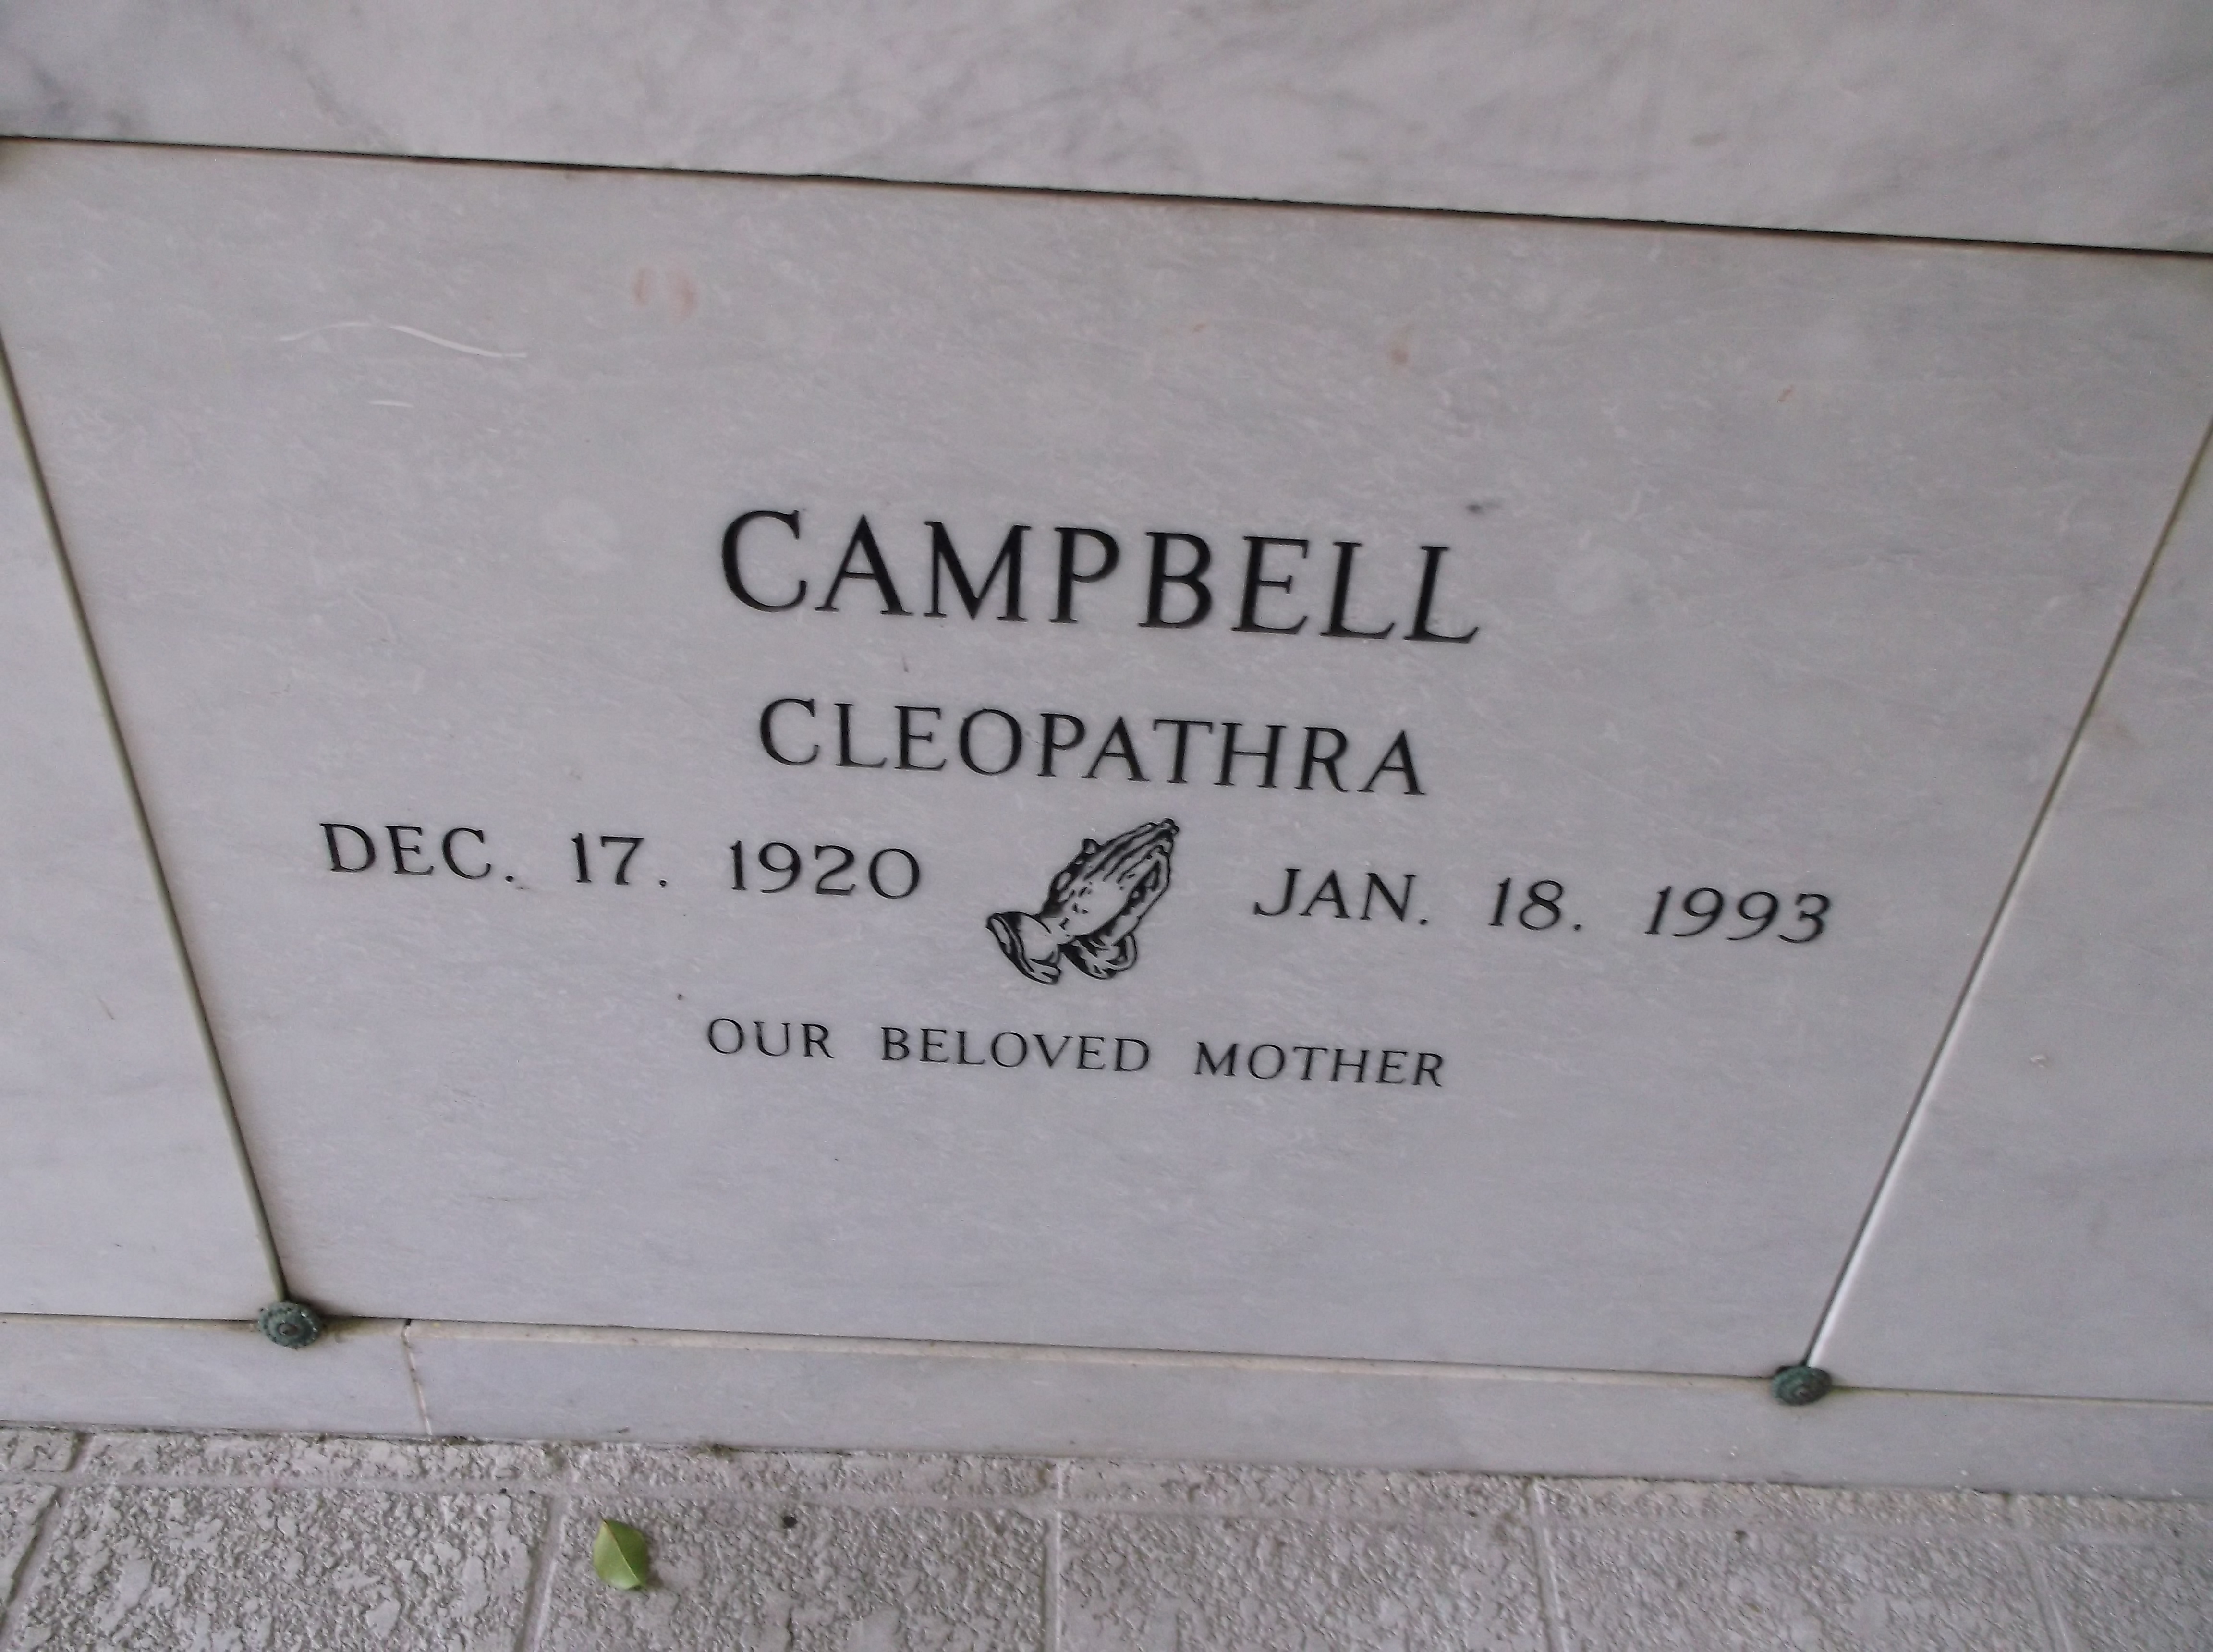 Cleopathra Campbell